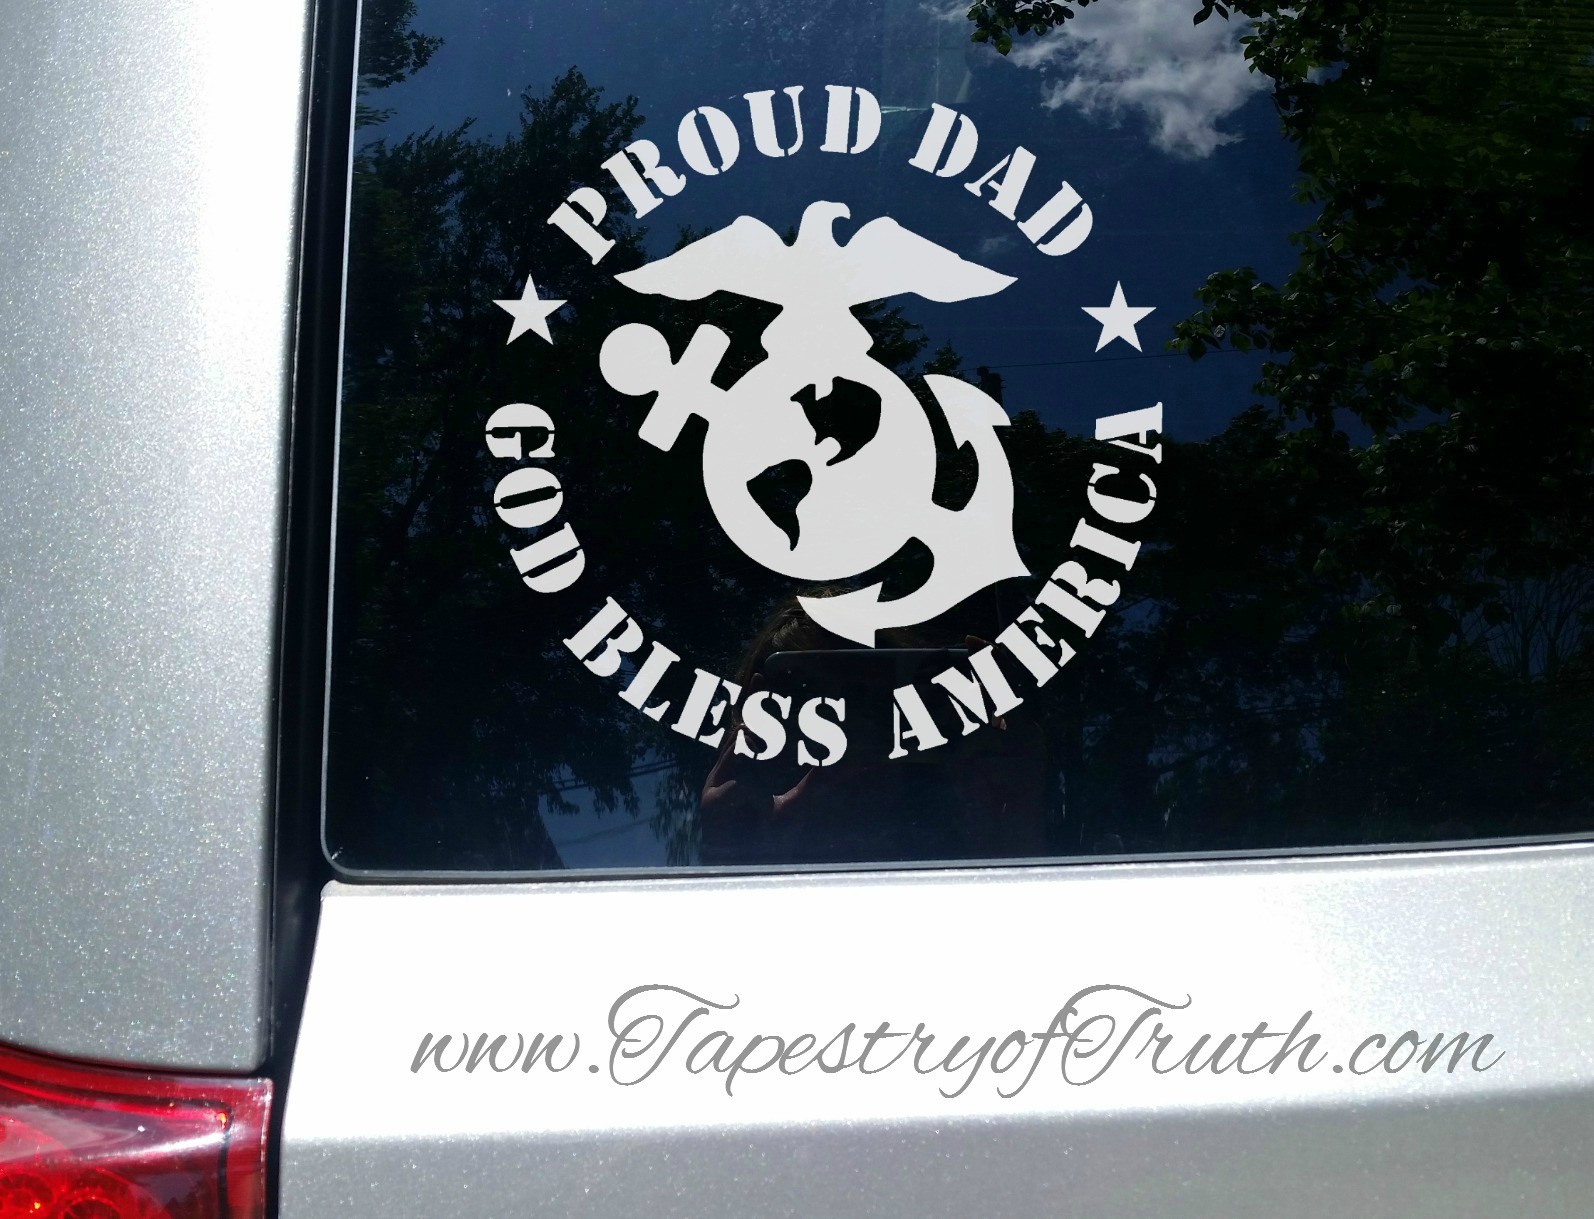 Proud Dad (of a Marine) - God Bless America - Car Decal